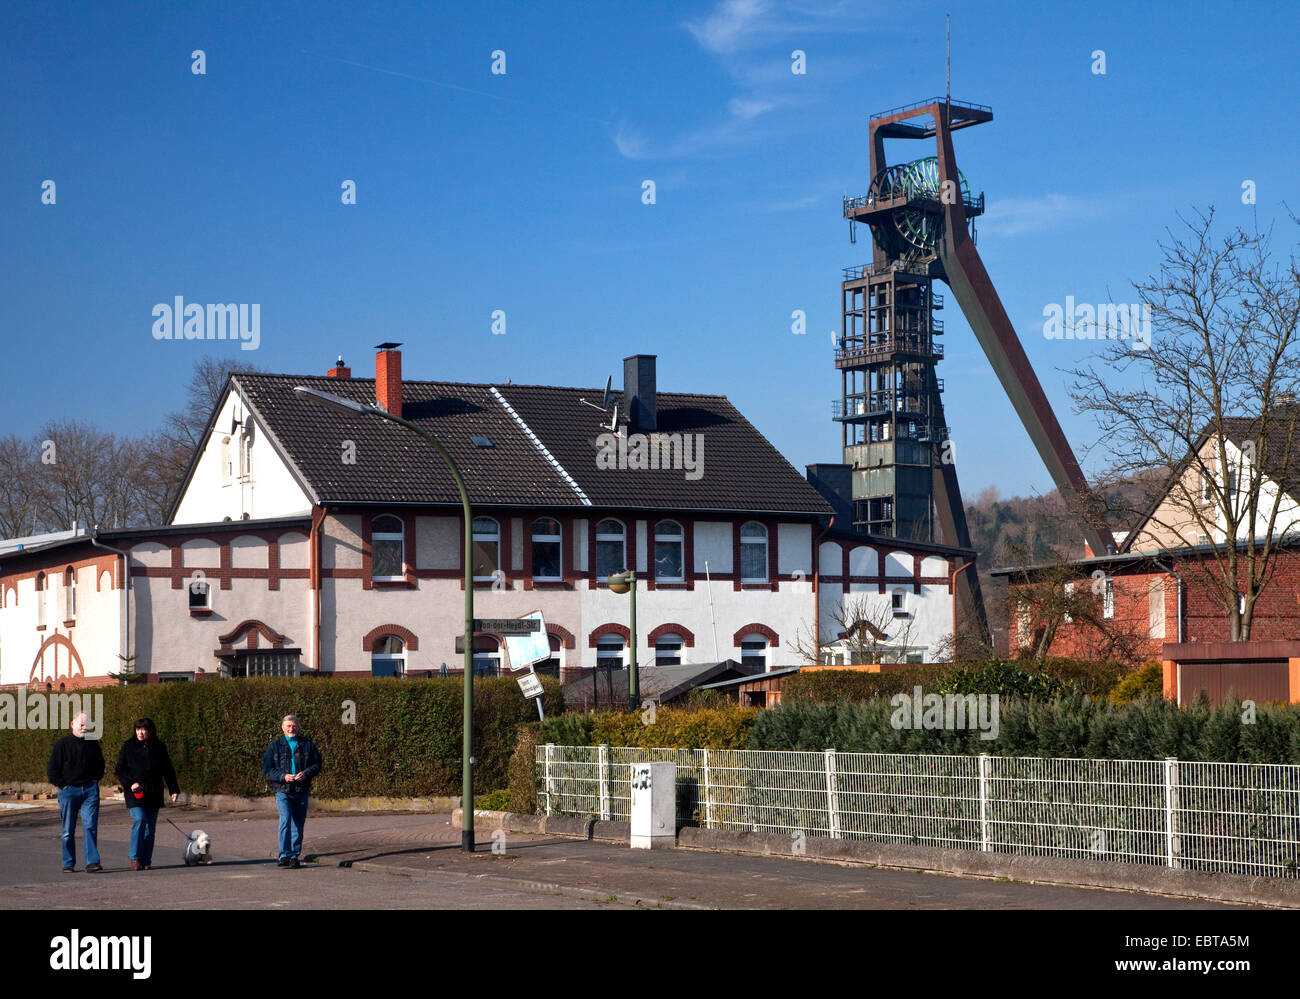 workers' housing estate Hochlarmark and pit frame, Germany, North Rhine-Westphalia, Ruhr Area, Recklinghausen Stock Photo